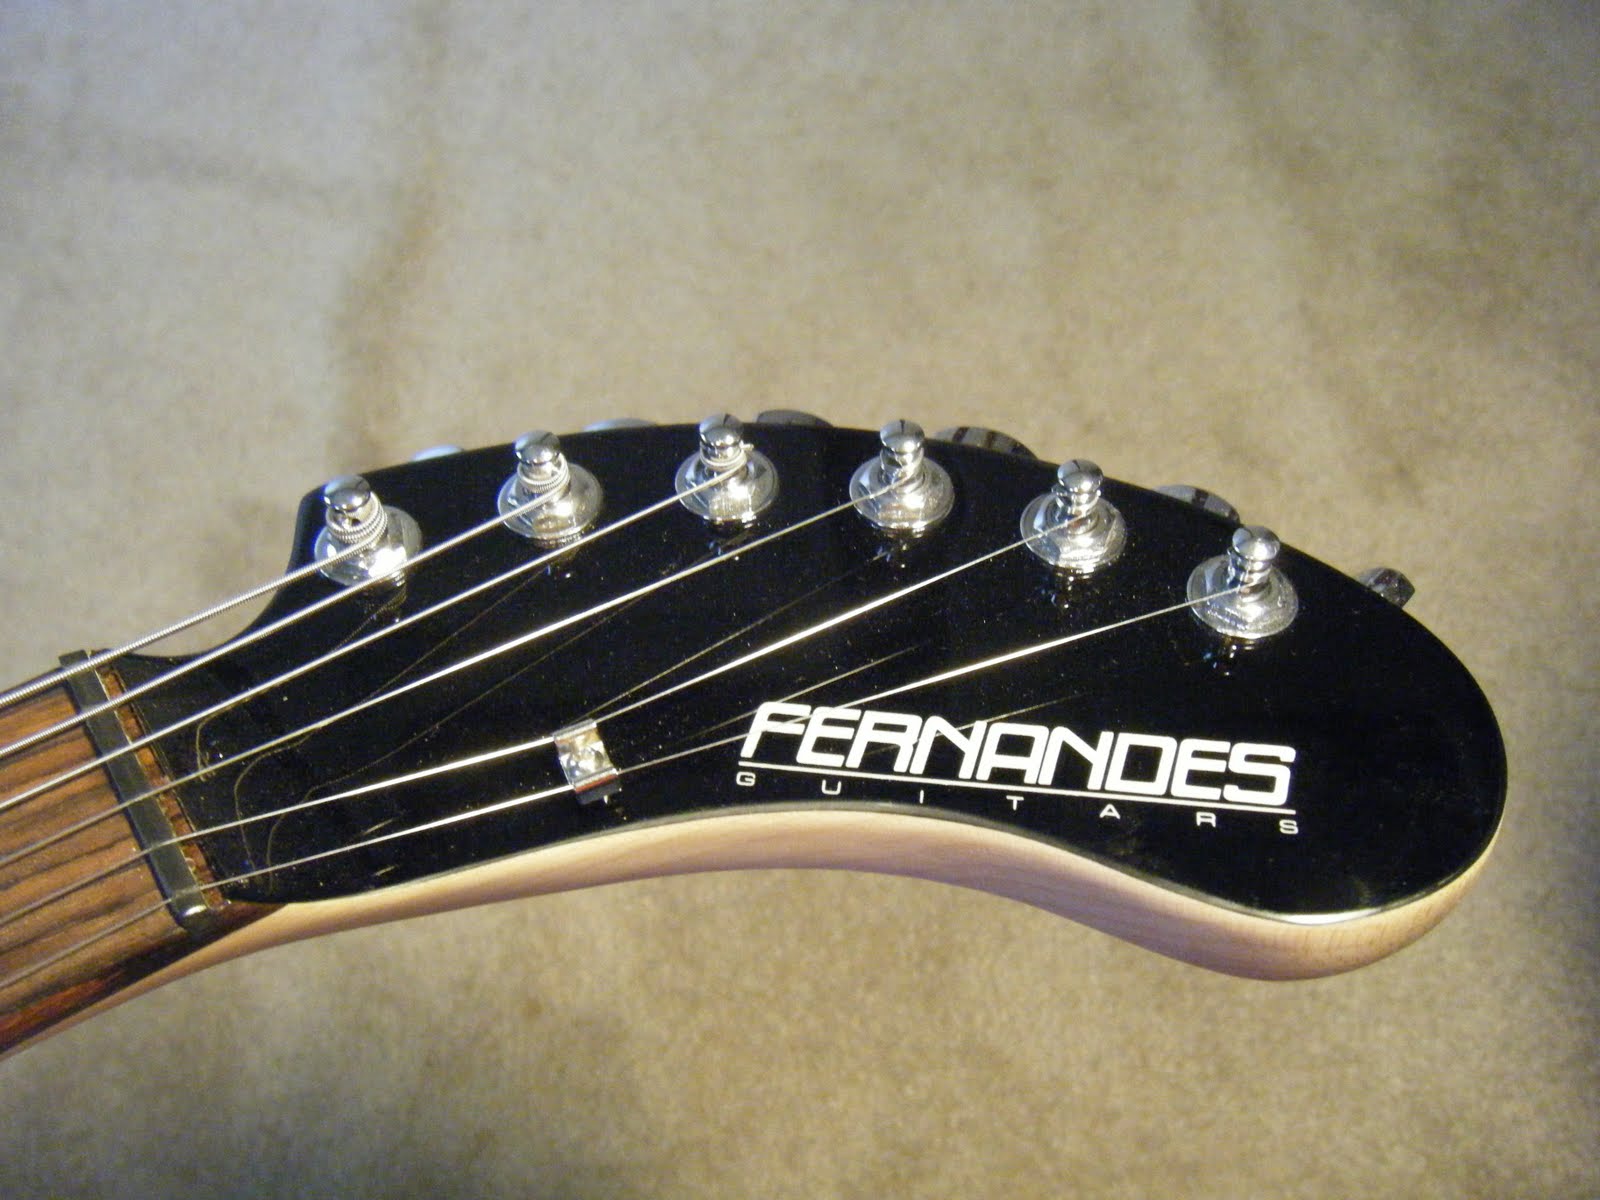 The Guitar Therapist: REVIEW: Fernandes ZO-3 Series Guitar